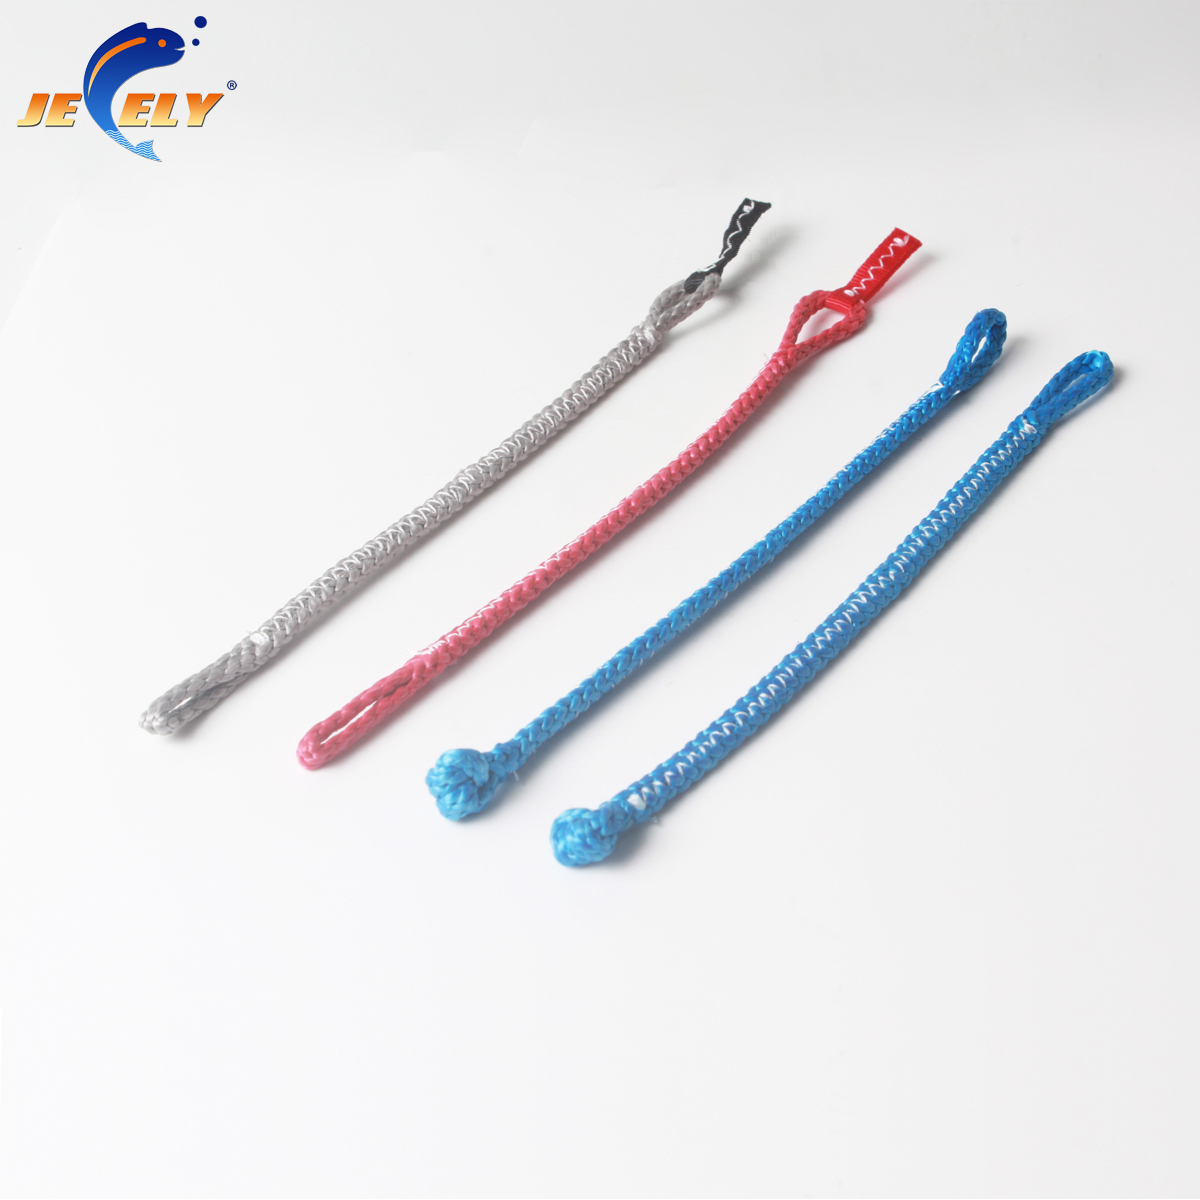 UHMWPE kite flying pigtail repair lines from China manufacturer - JEELY